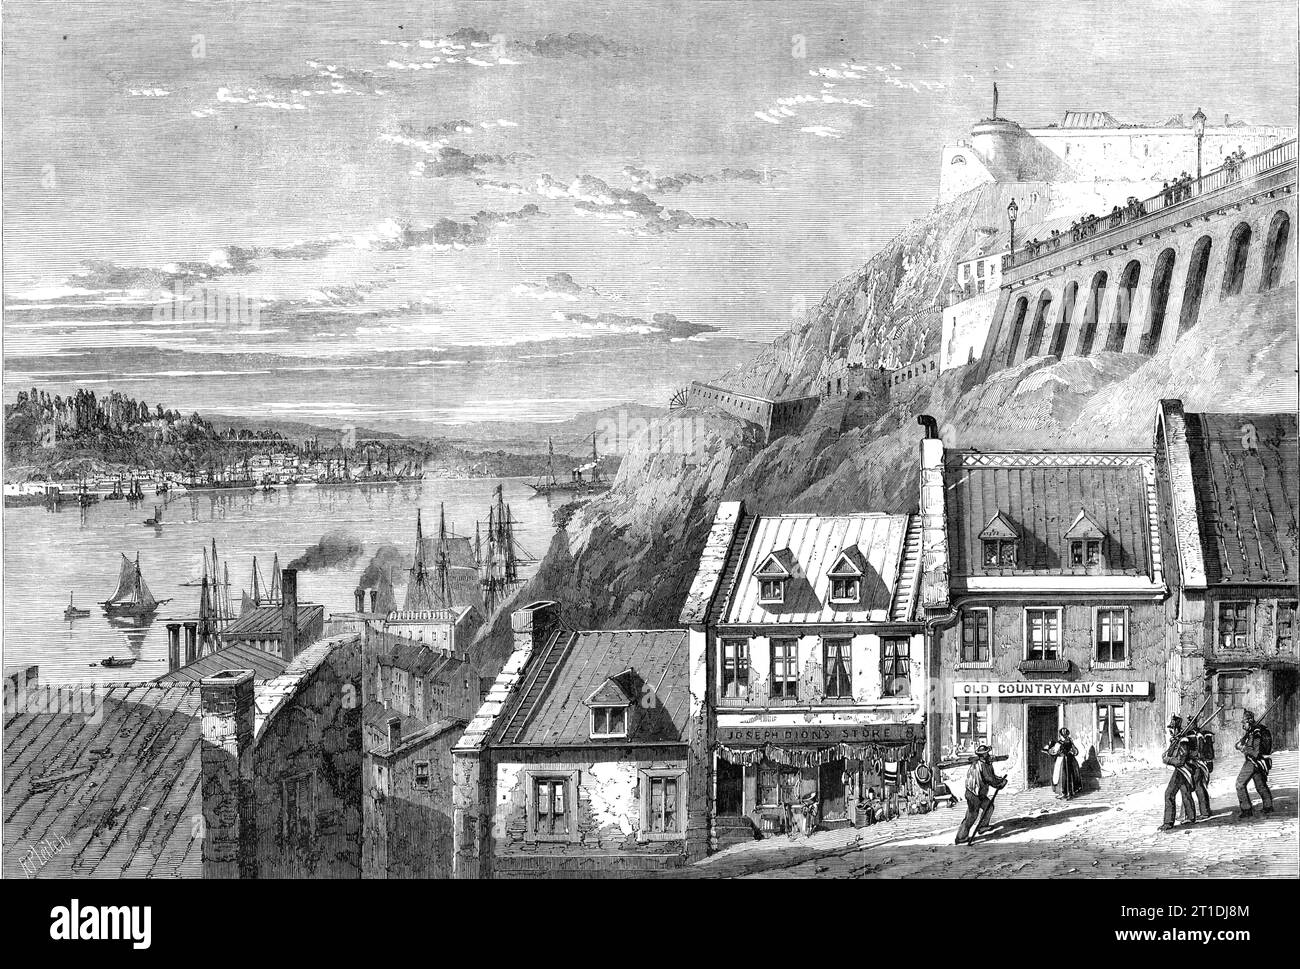 The Visit of the Prince of Wales to Canada - the Citadel of Quebec, [Canada], from Prescott Gate - from a drawing by Captain Williams, R.A., 1860. 'Standing on a bold and precipitous promontory, Quebec has not inappropriately been called the &quot;Gibraltar of America,&quot;...The citadel stands on what is called Cape Diamond, three hundred and fifty feet above the level of the sea, and includes about forty acres of ground. The view from off the citadel is of the most picturesque and grand character. There will be seen the majestic St. Lawrence, winding its course for about forty miles, whilst Stock Photo